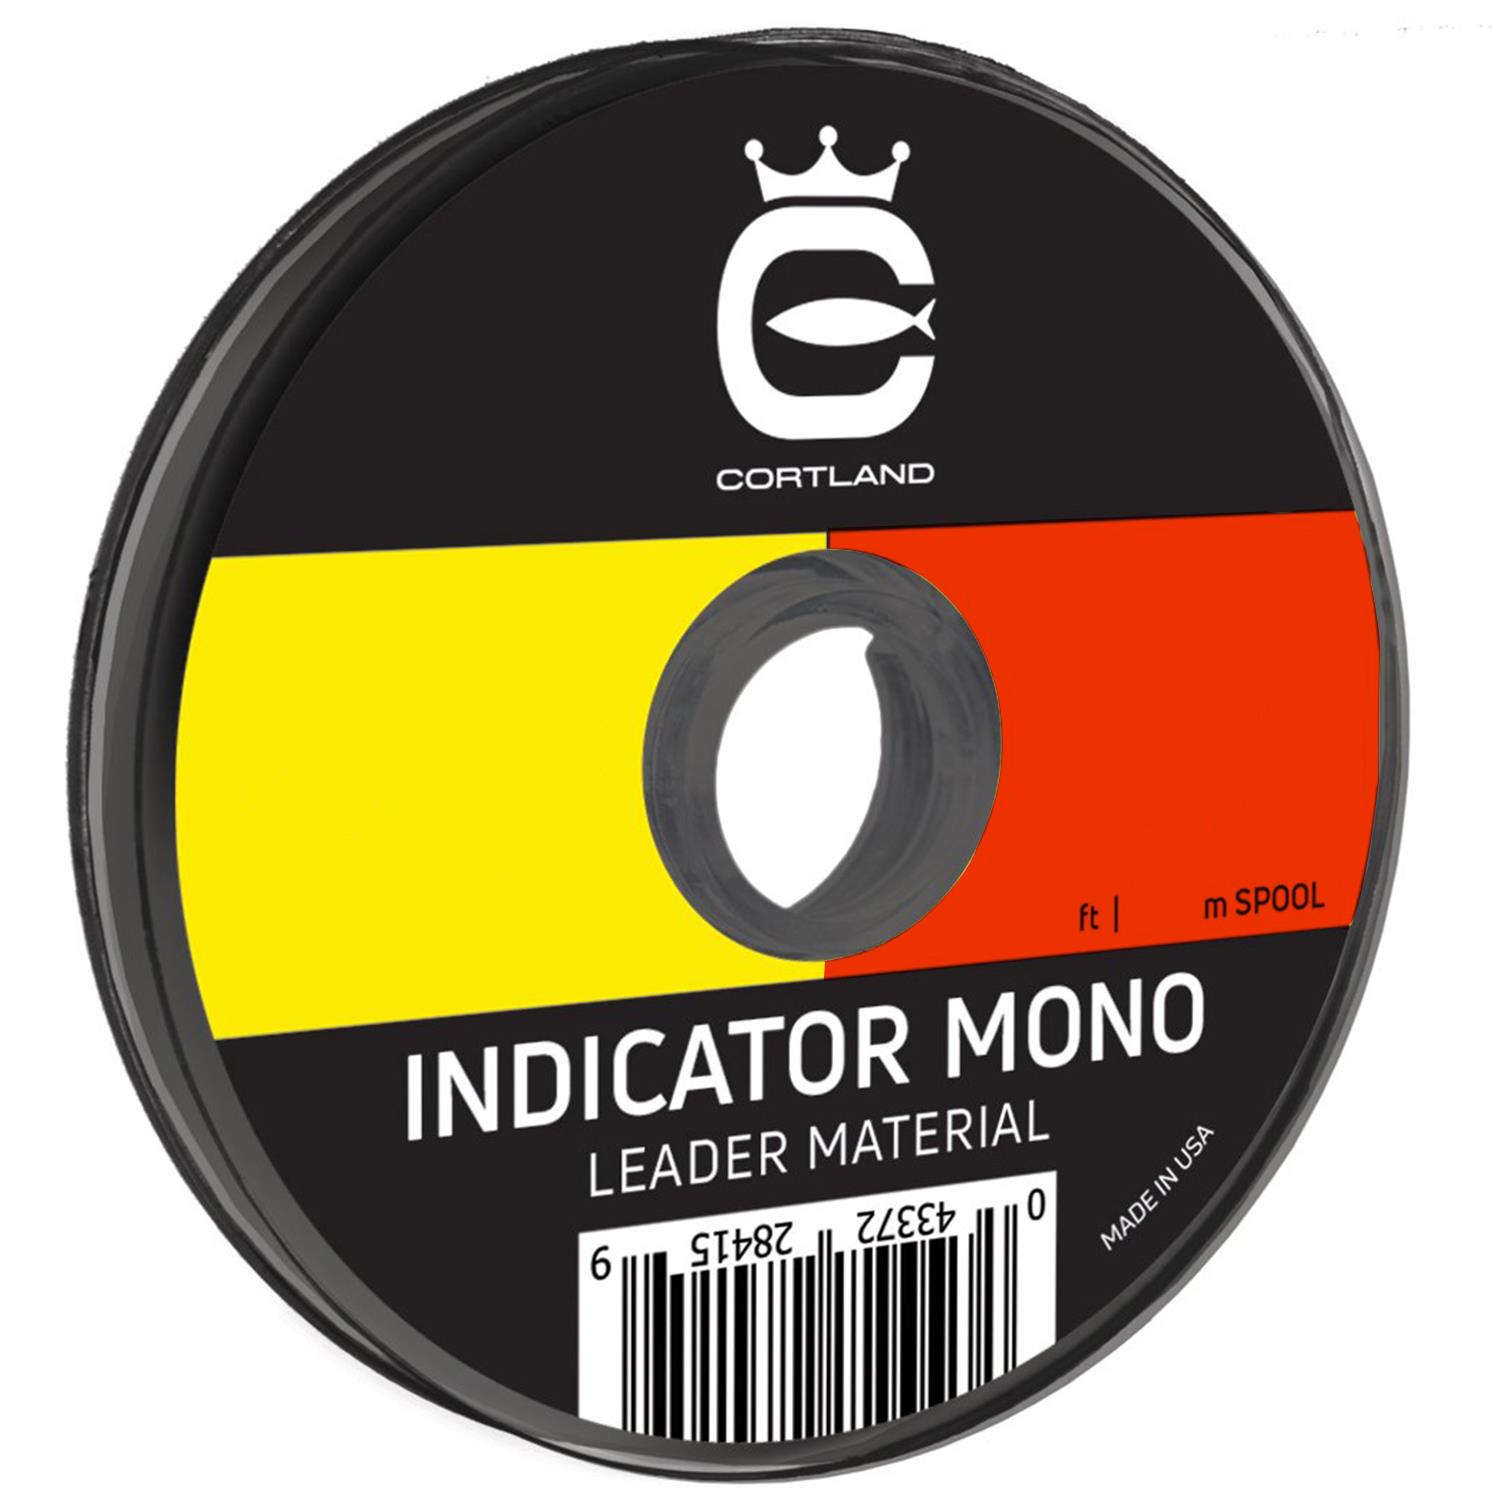 Cortland Indicator Mono Leader Material Bi-Color Red and Yellow